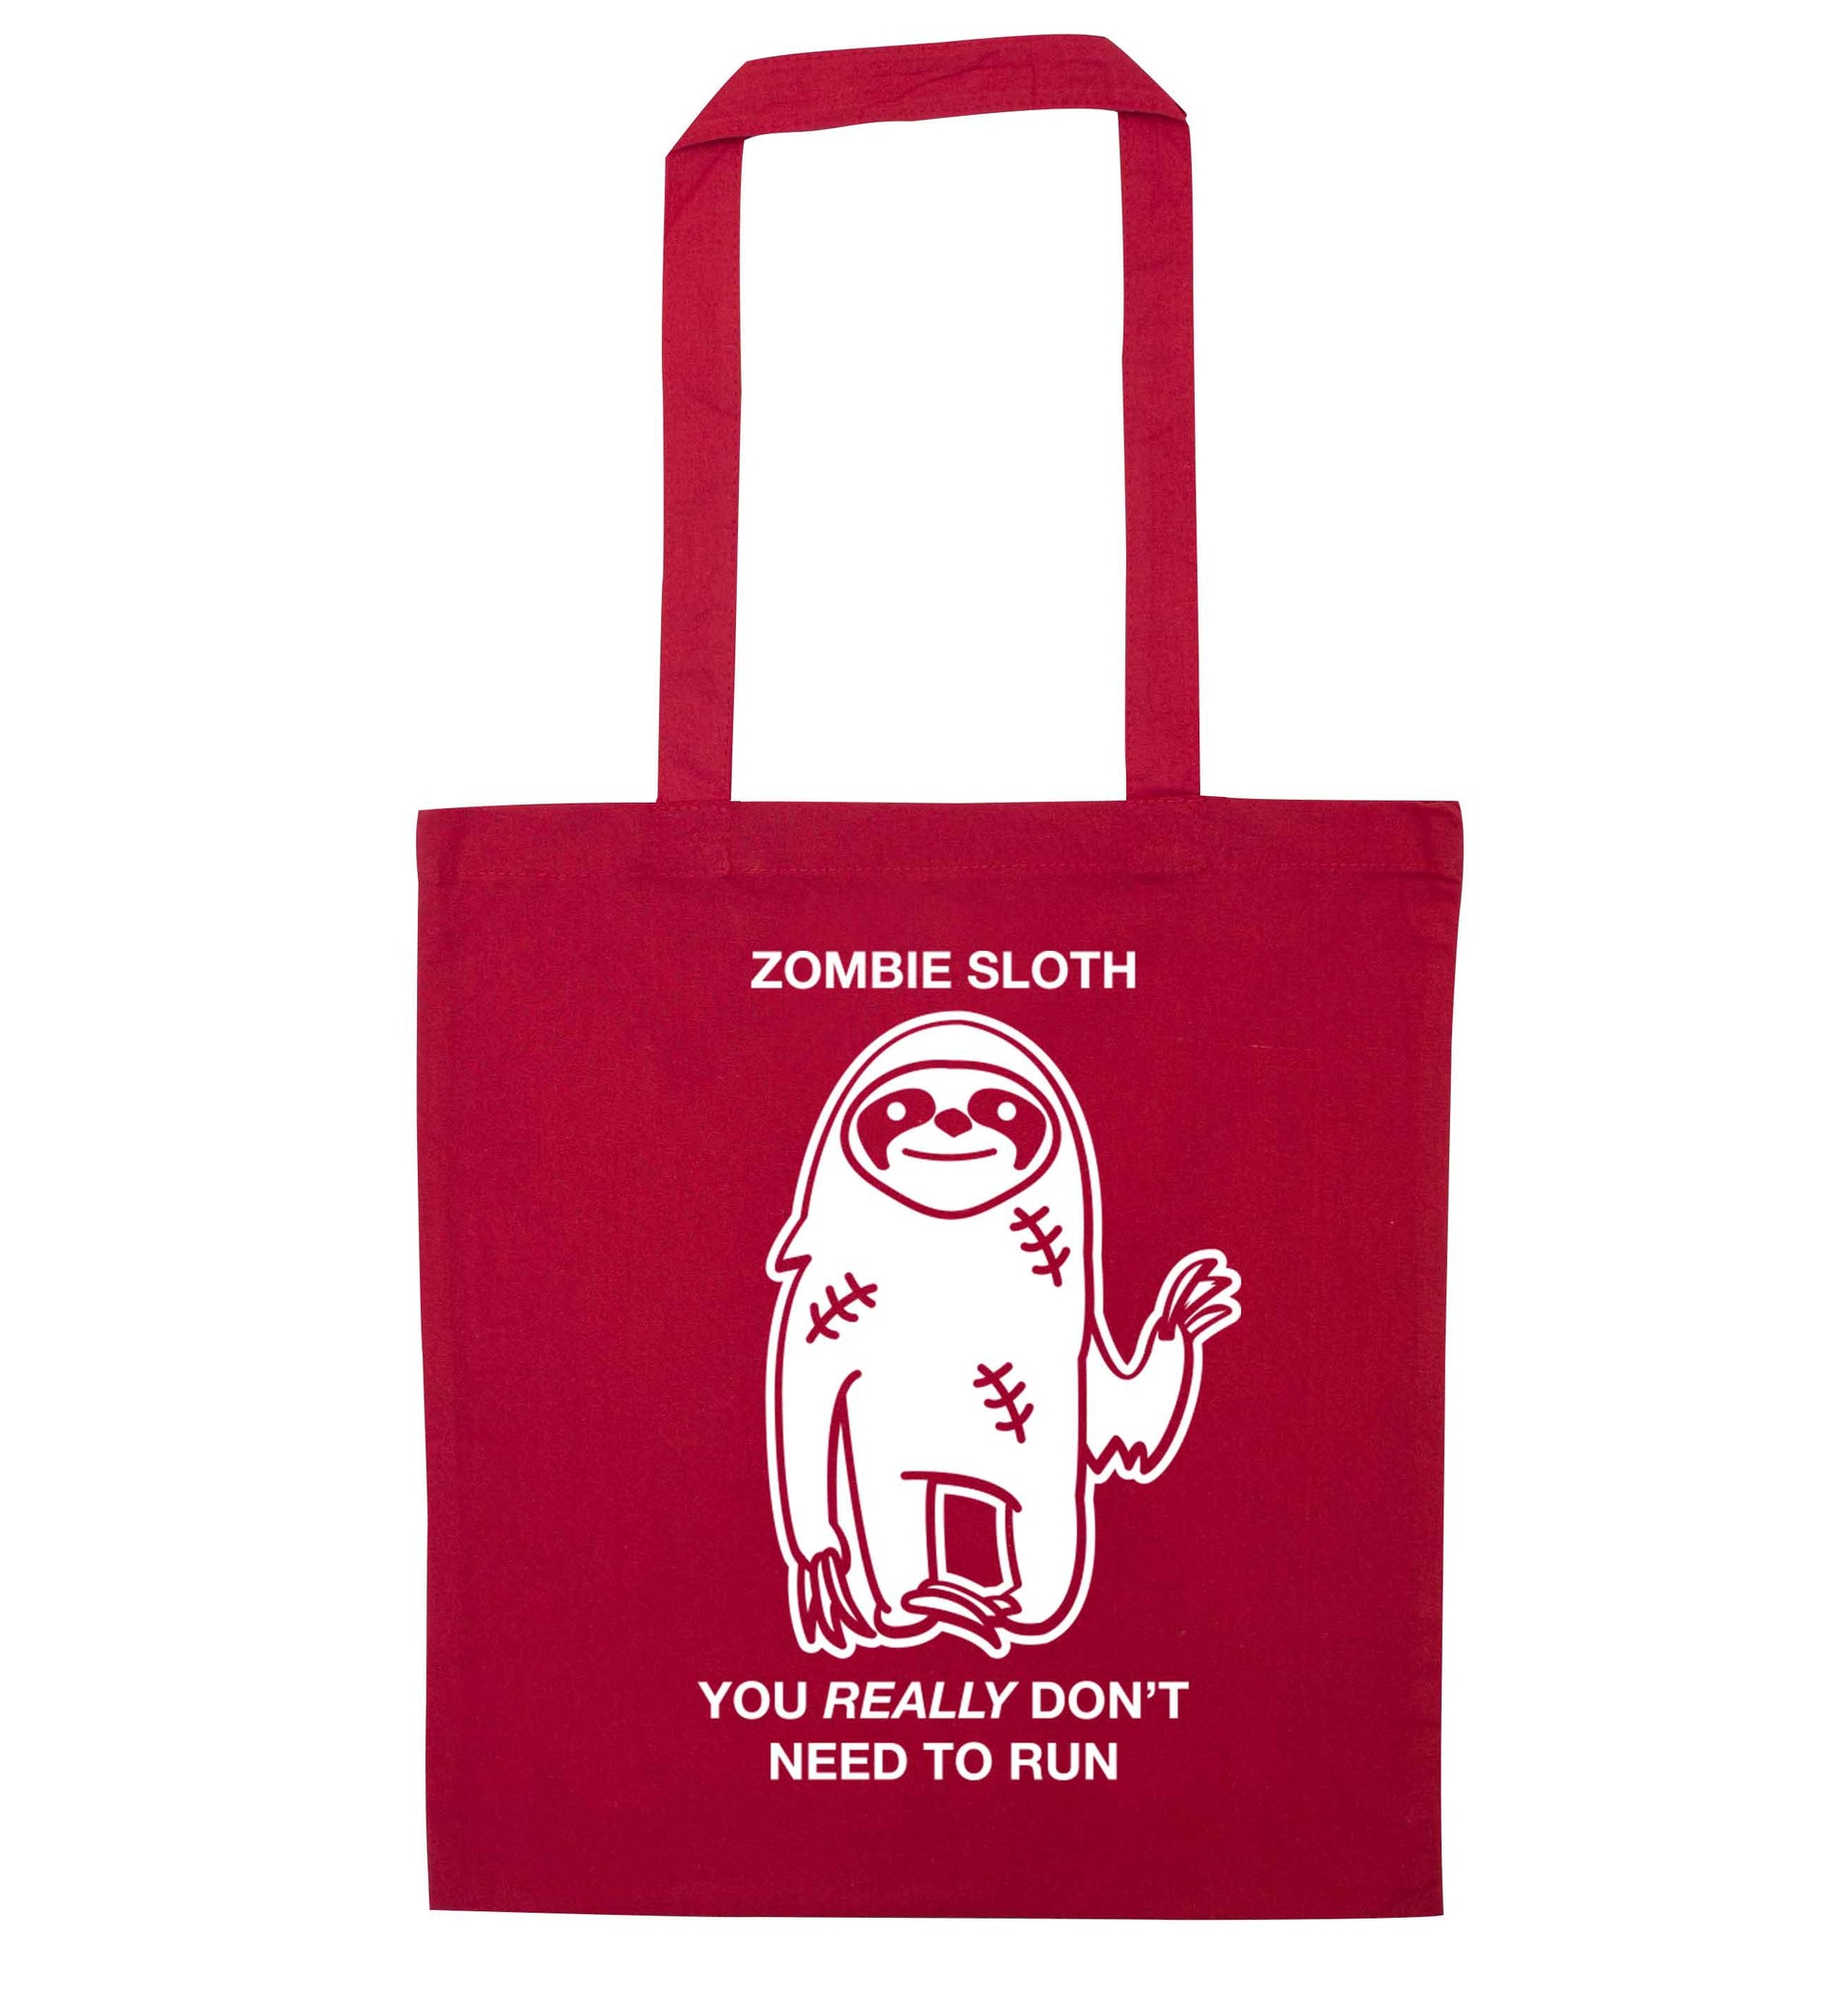 Zombie sloth you really don't need to run red tote bag